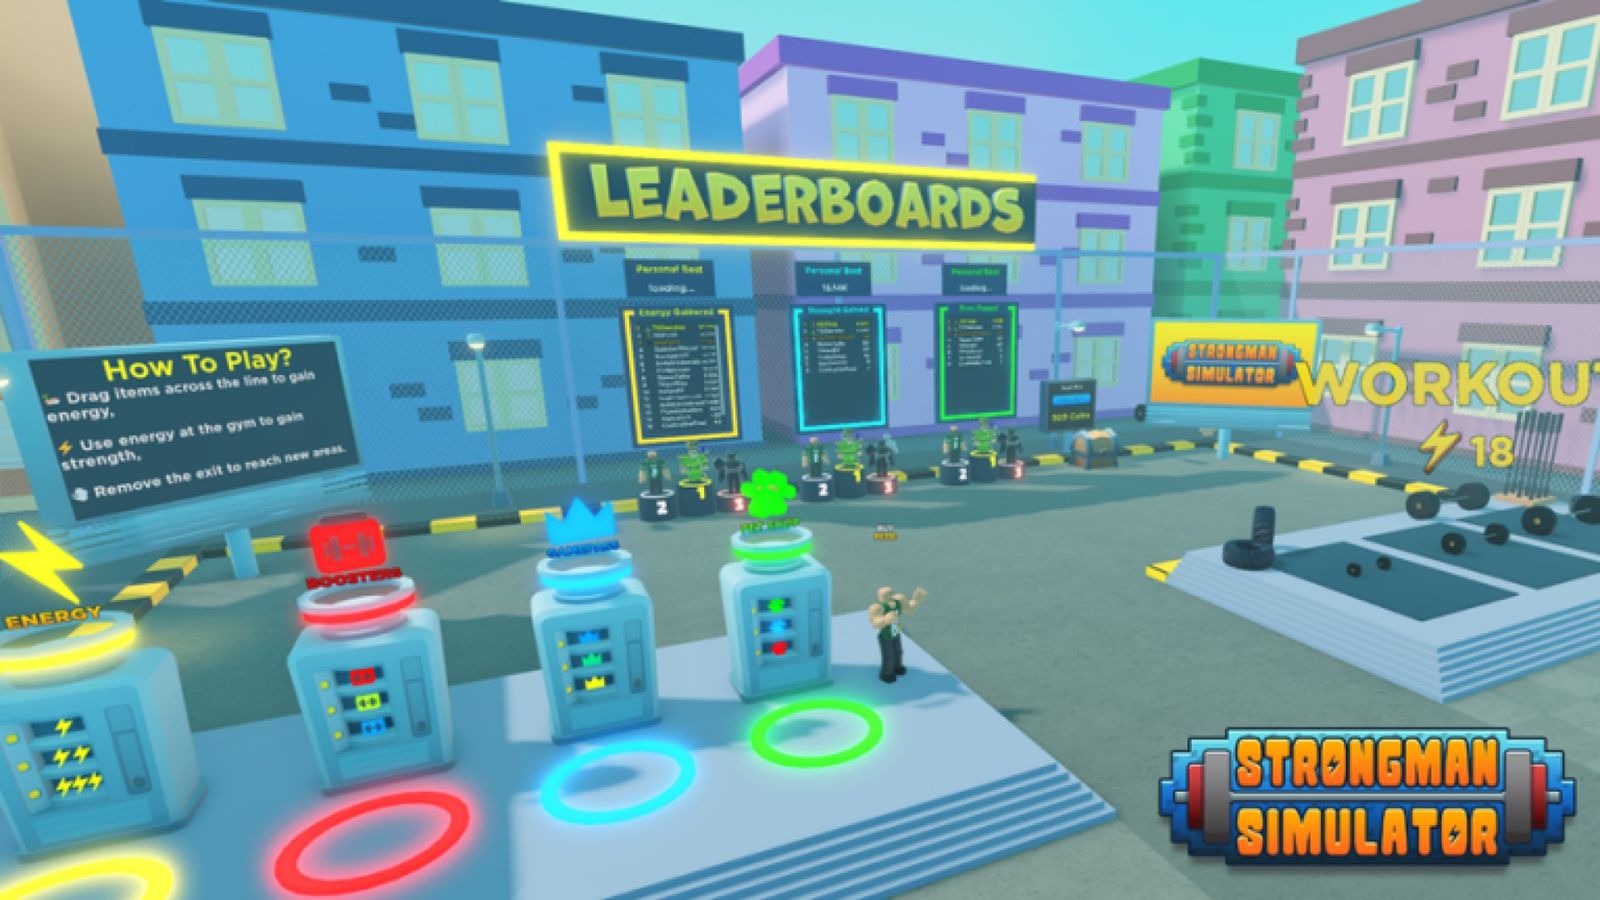 An overview of Strongman Simulator's central square filled with podiums, leaderboards, and workout areas